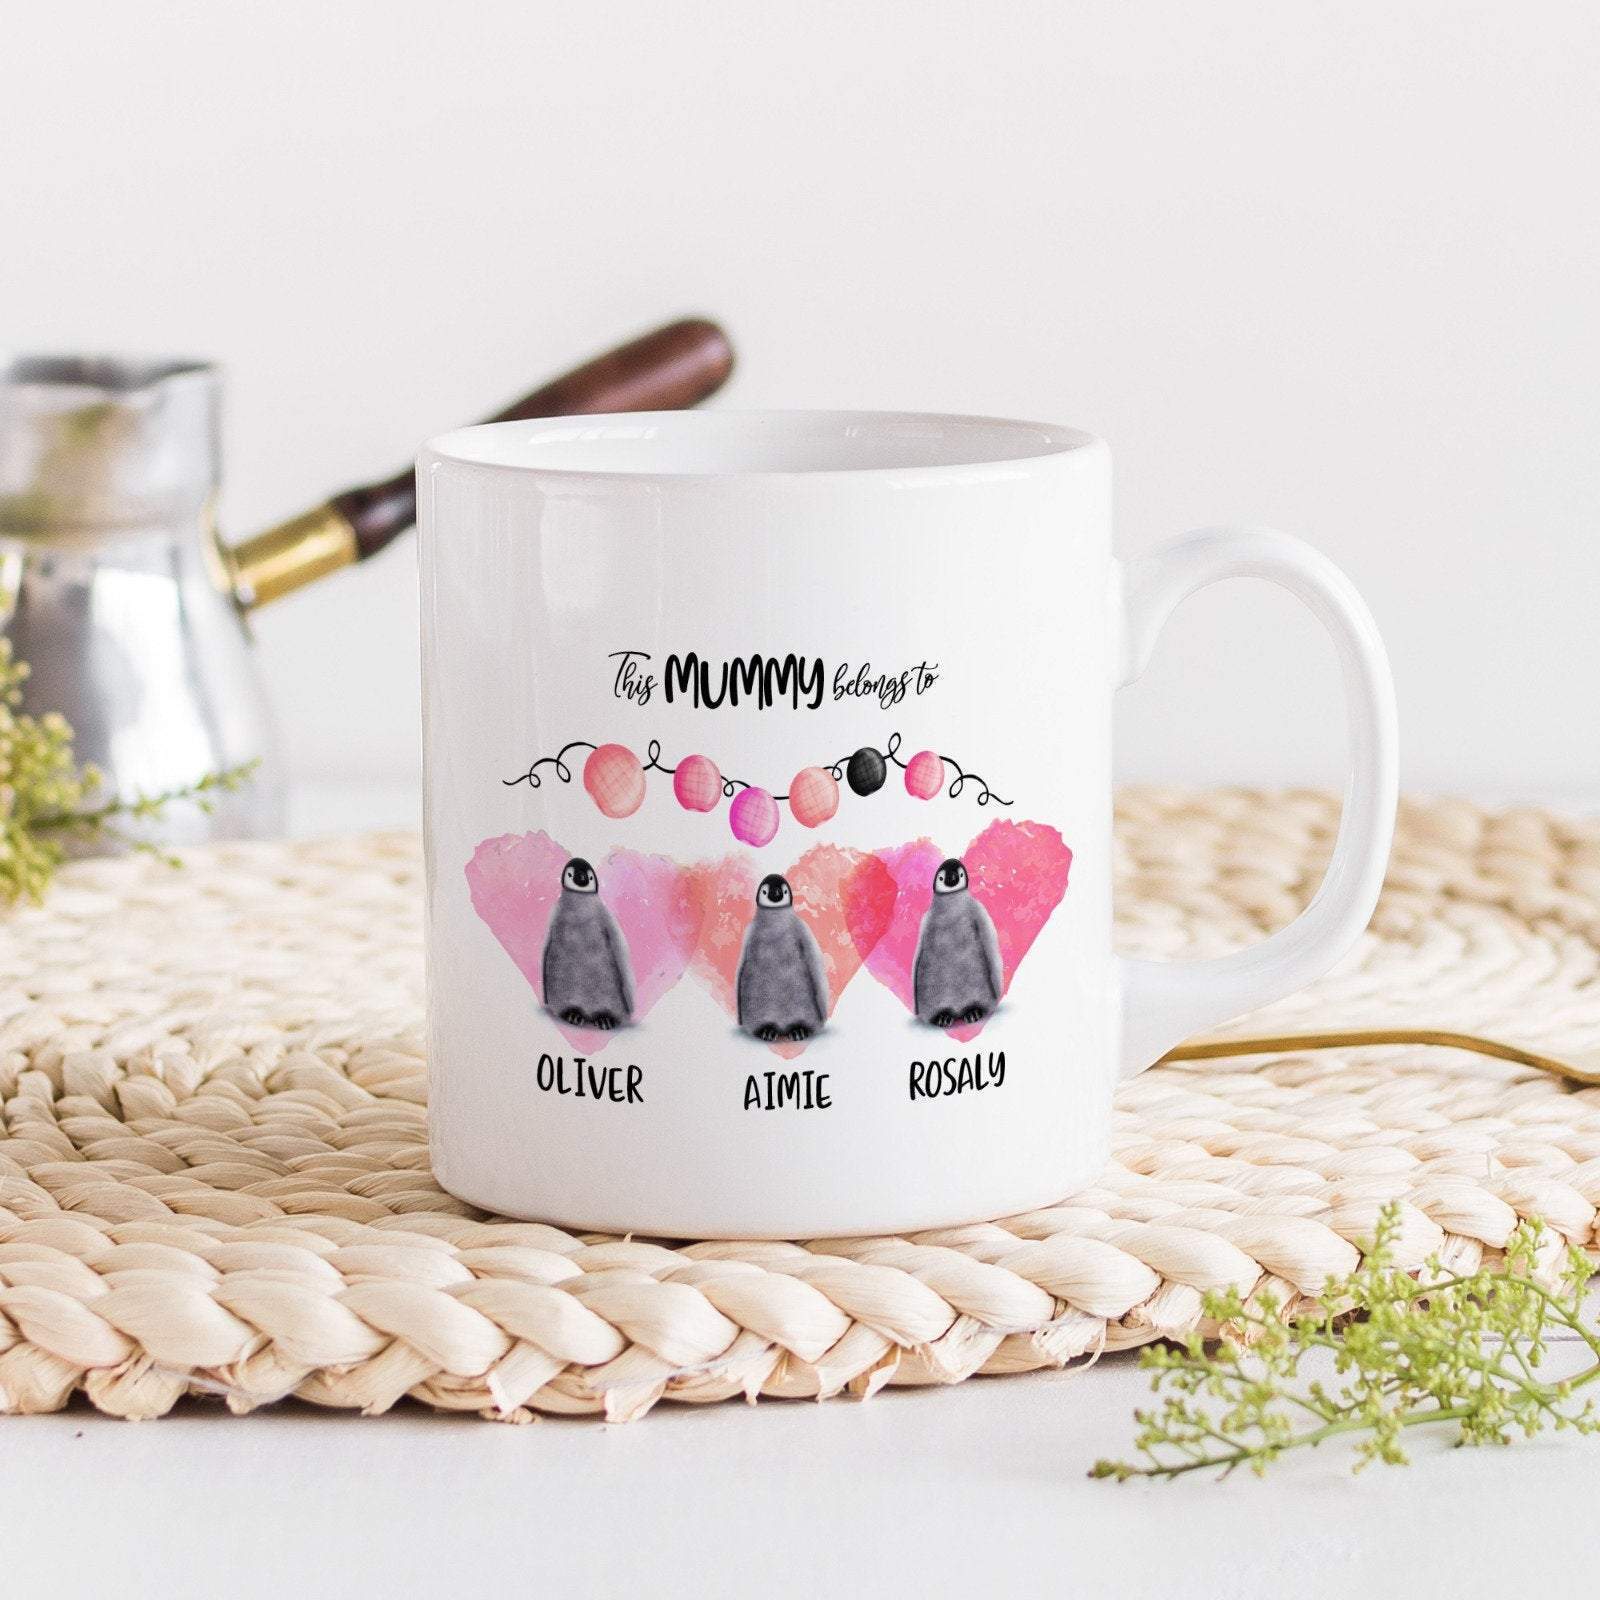 Personalised This mummy belongs to mug with children names,Mother's Day Gift